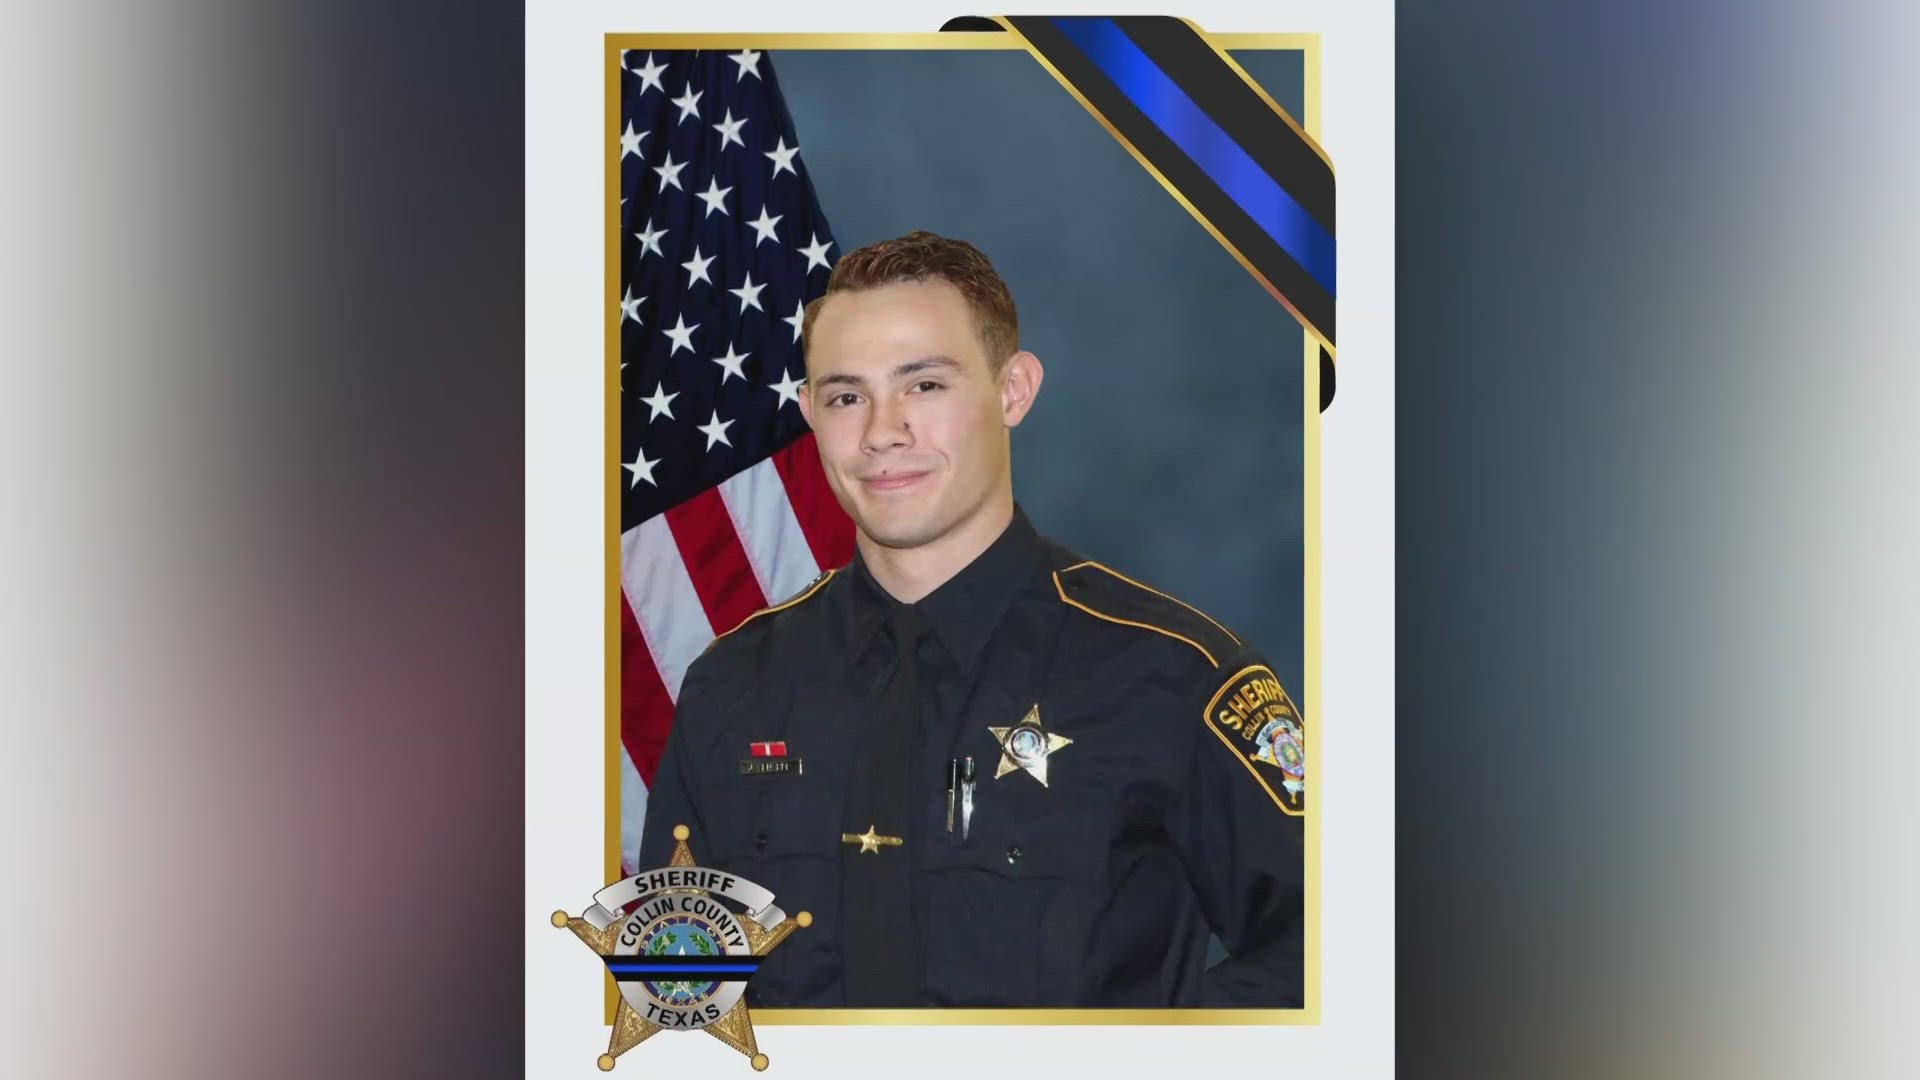 Deputy Sheriff Johnathan Venable passed away Friday, March 1, according to the Collin County Sheriff's Department.